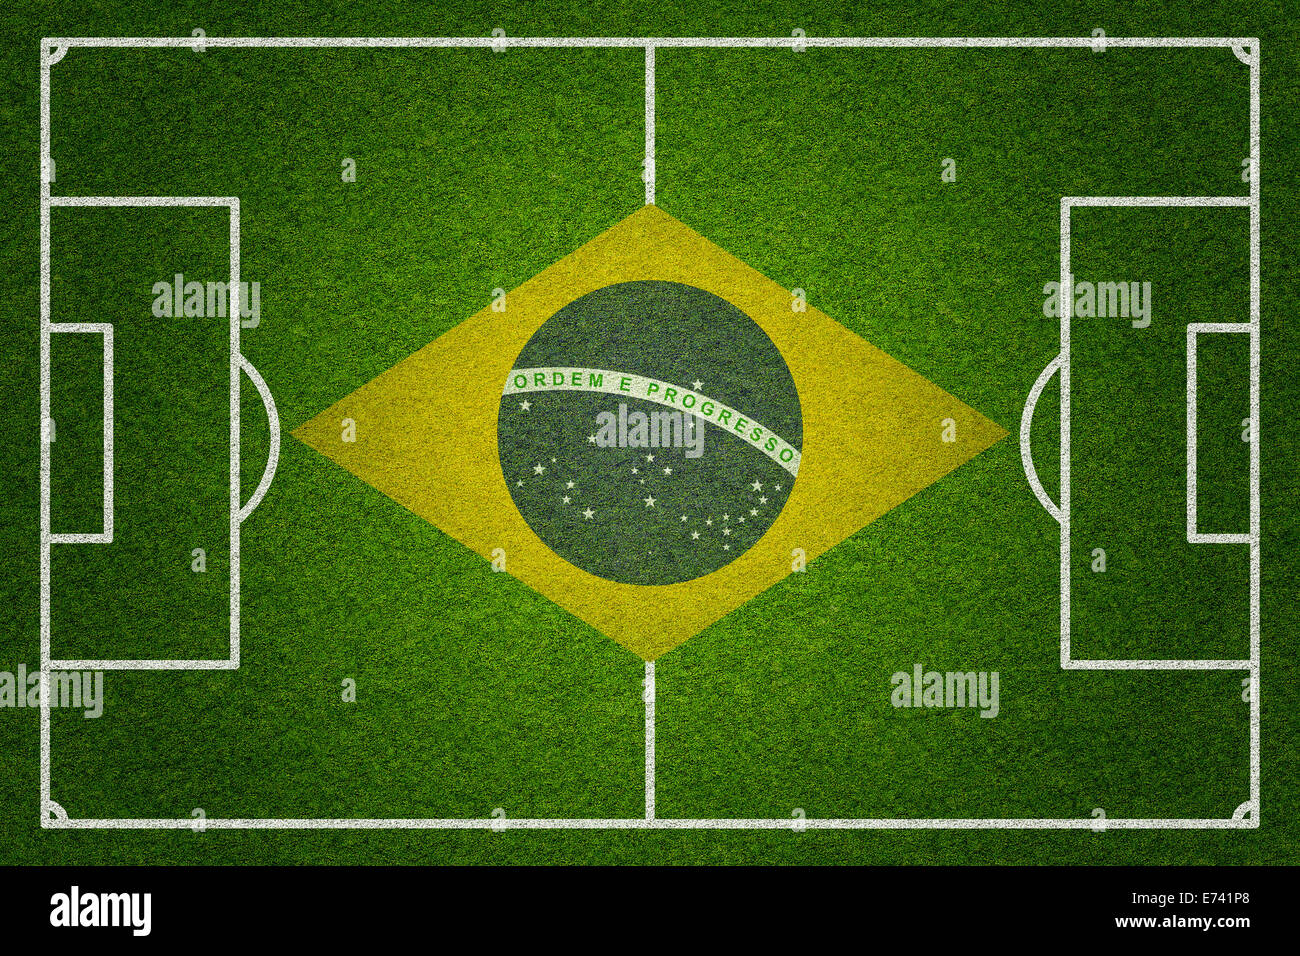 Brazil soccer or football pitch top view Stock Photo